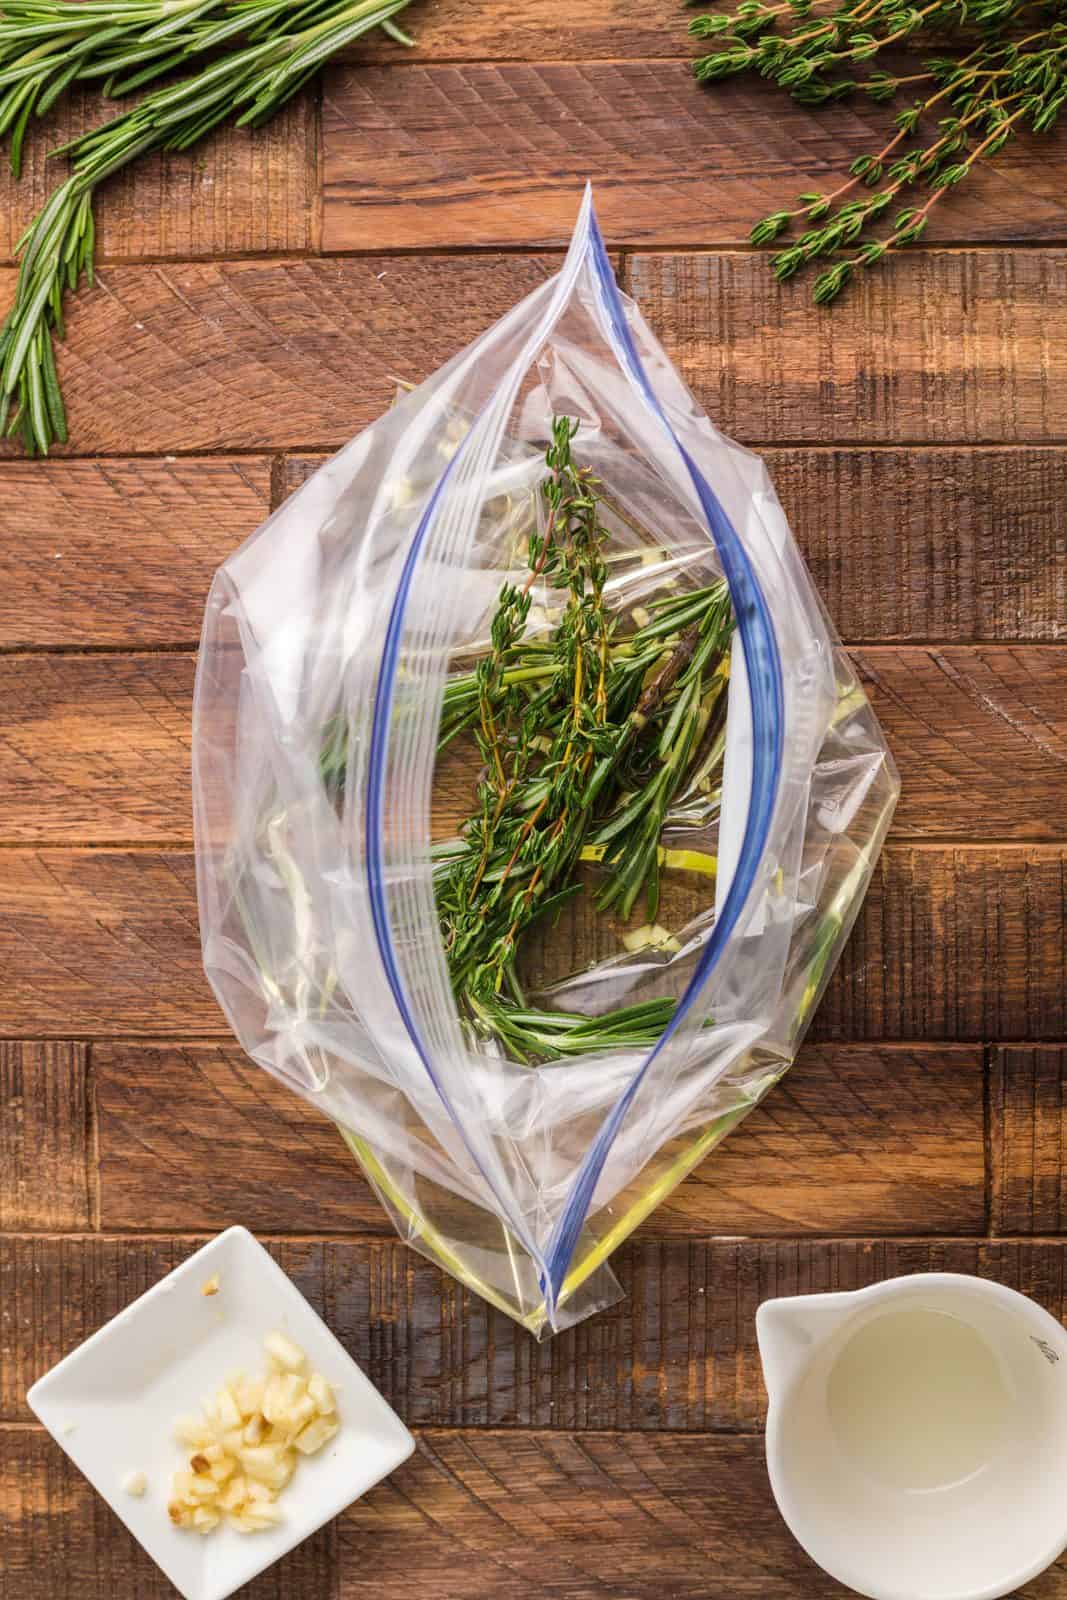 Grapeseed oil, garlic rosemary sprigs added to ziptop bag.